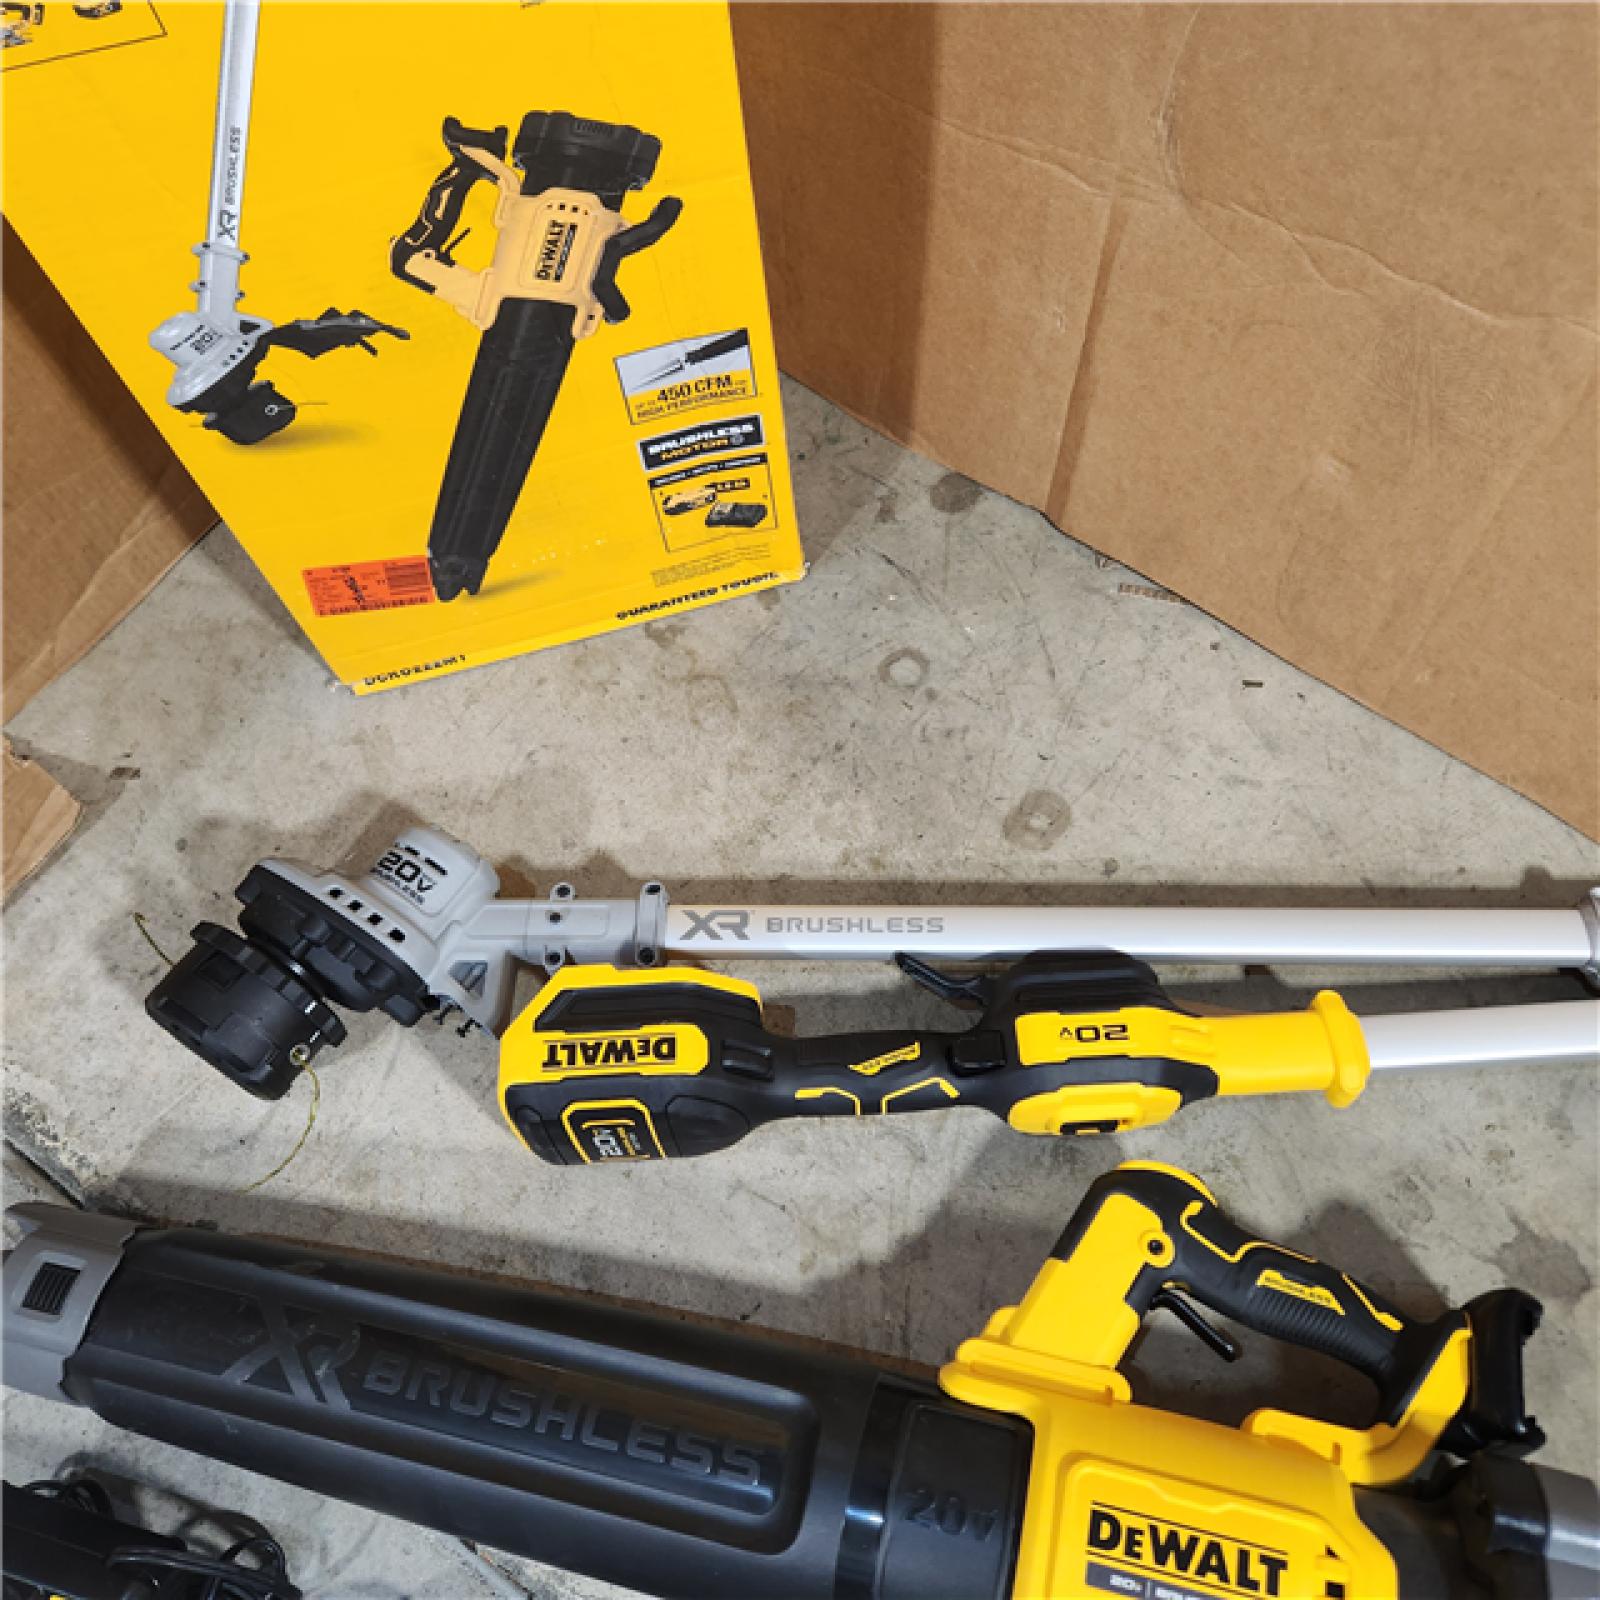 Houston location- AS-IS DEWALT 20V MAX Cordless Battery Powered String Trimmer & Leaf Blower Combo Kit with (1) 4.0 Ah Battery and Charger - Appears IN NEW Condition